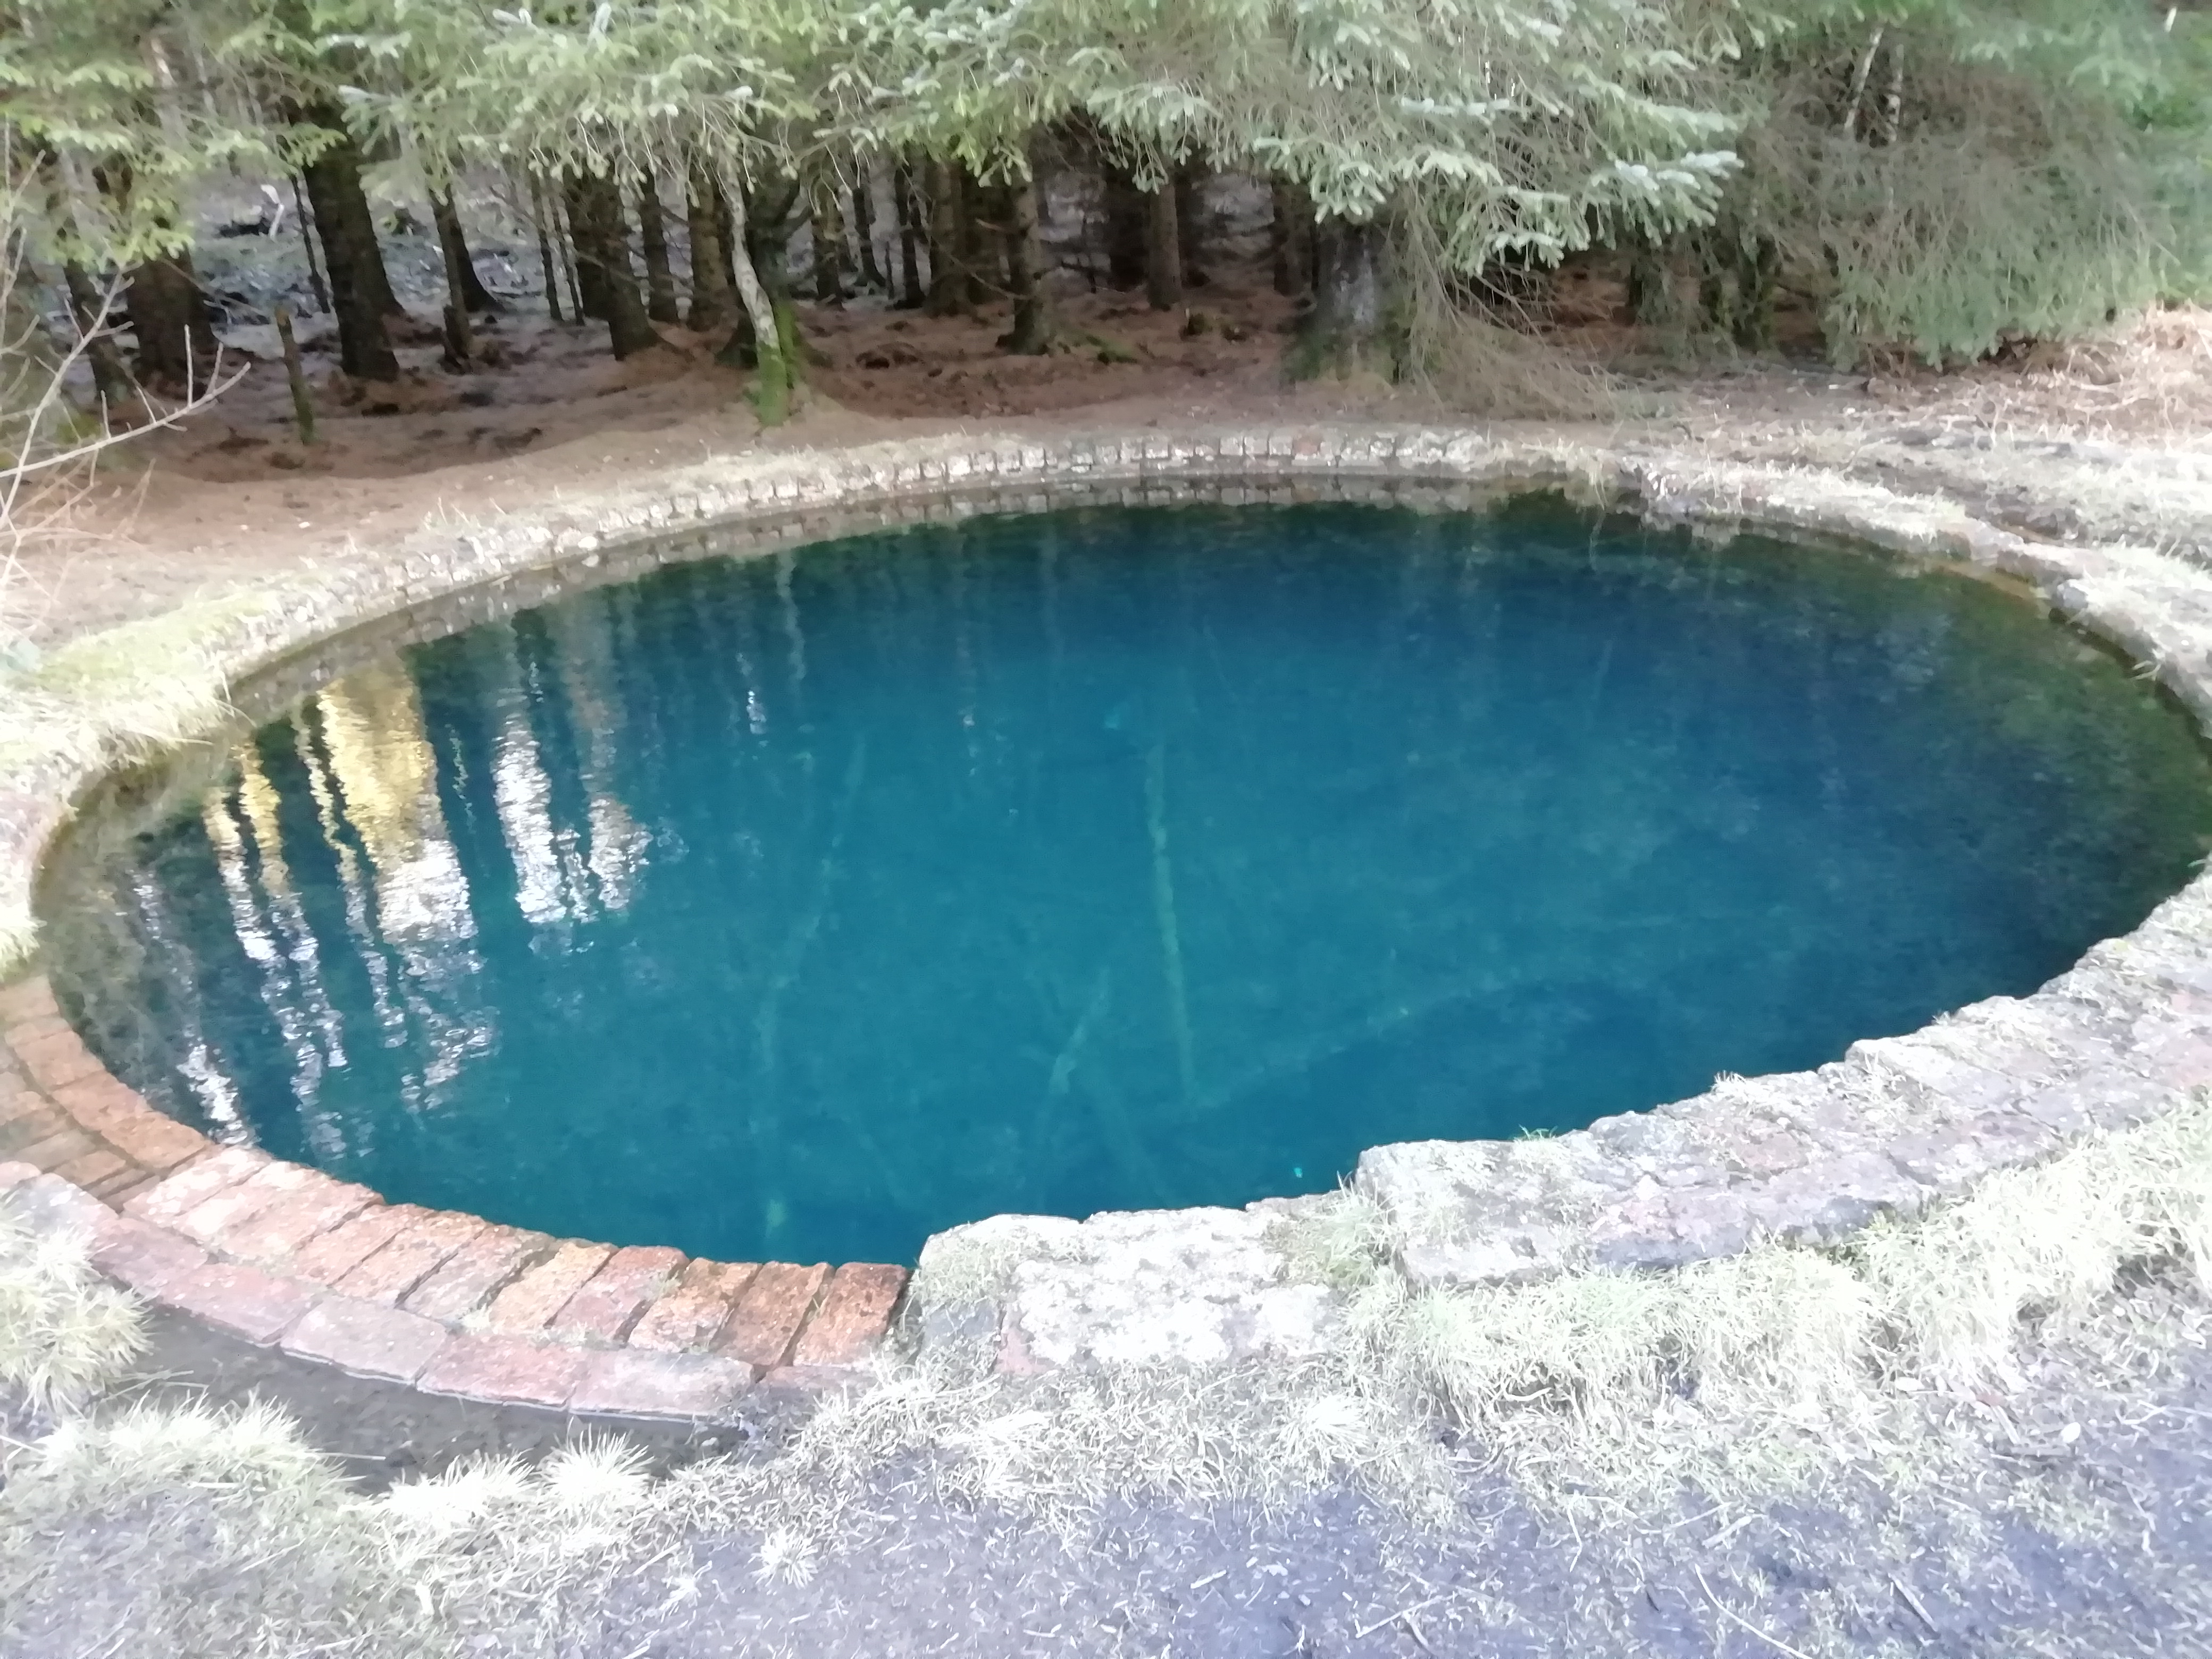 Random Places to visit #43… The Blue Pool – Tor Wood – The Exploring Cat